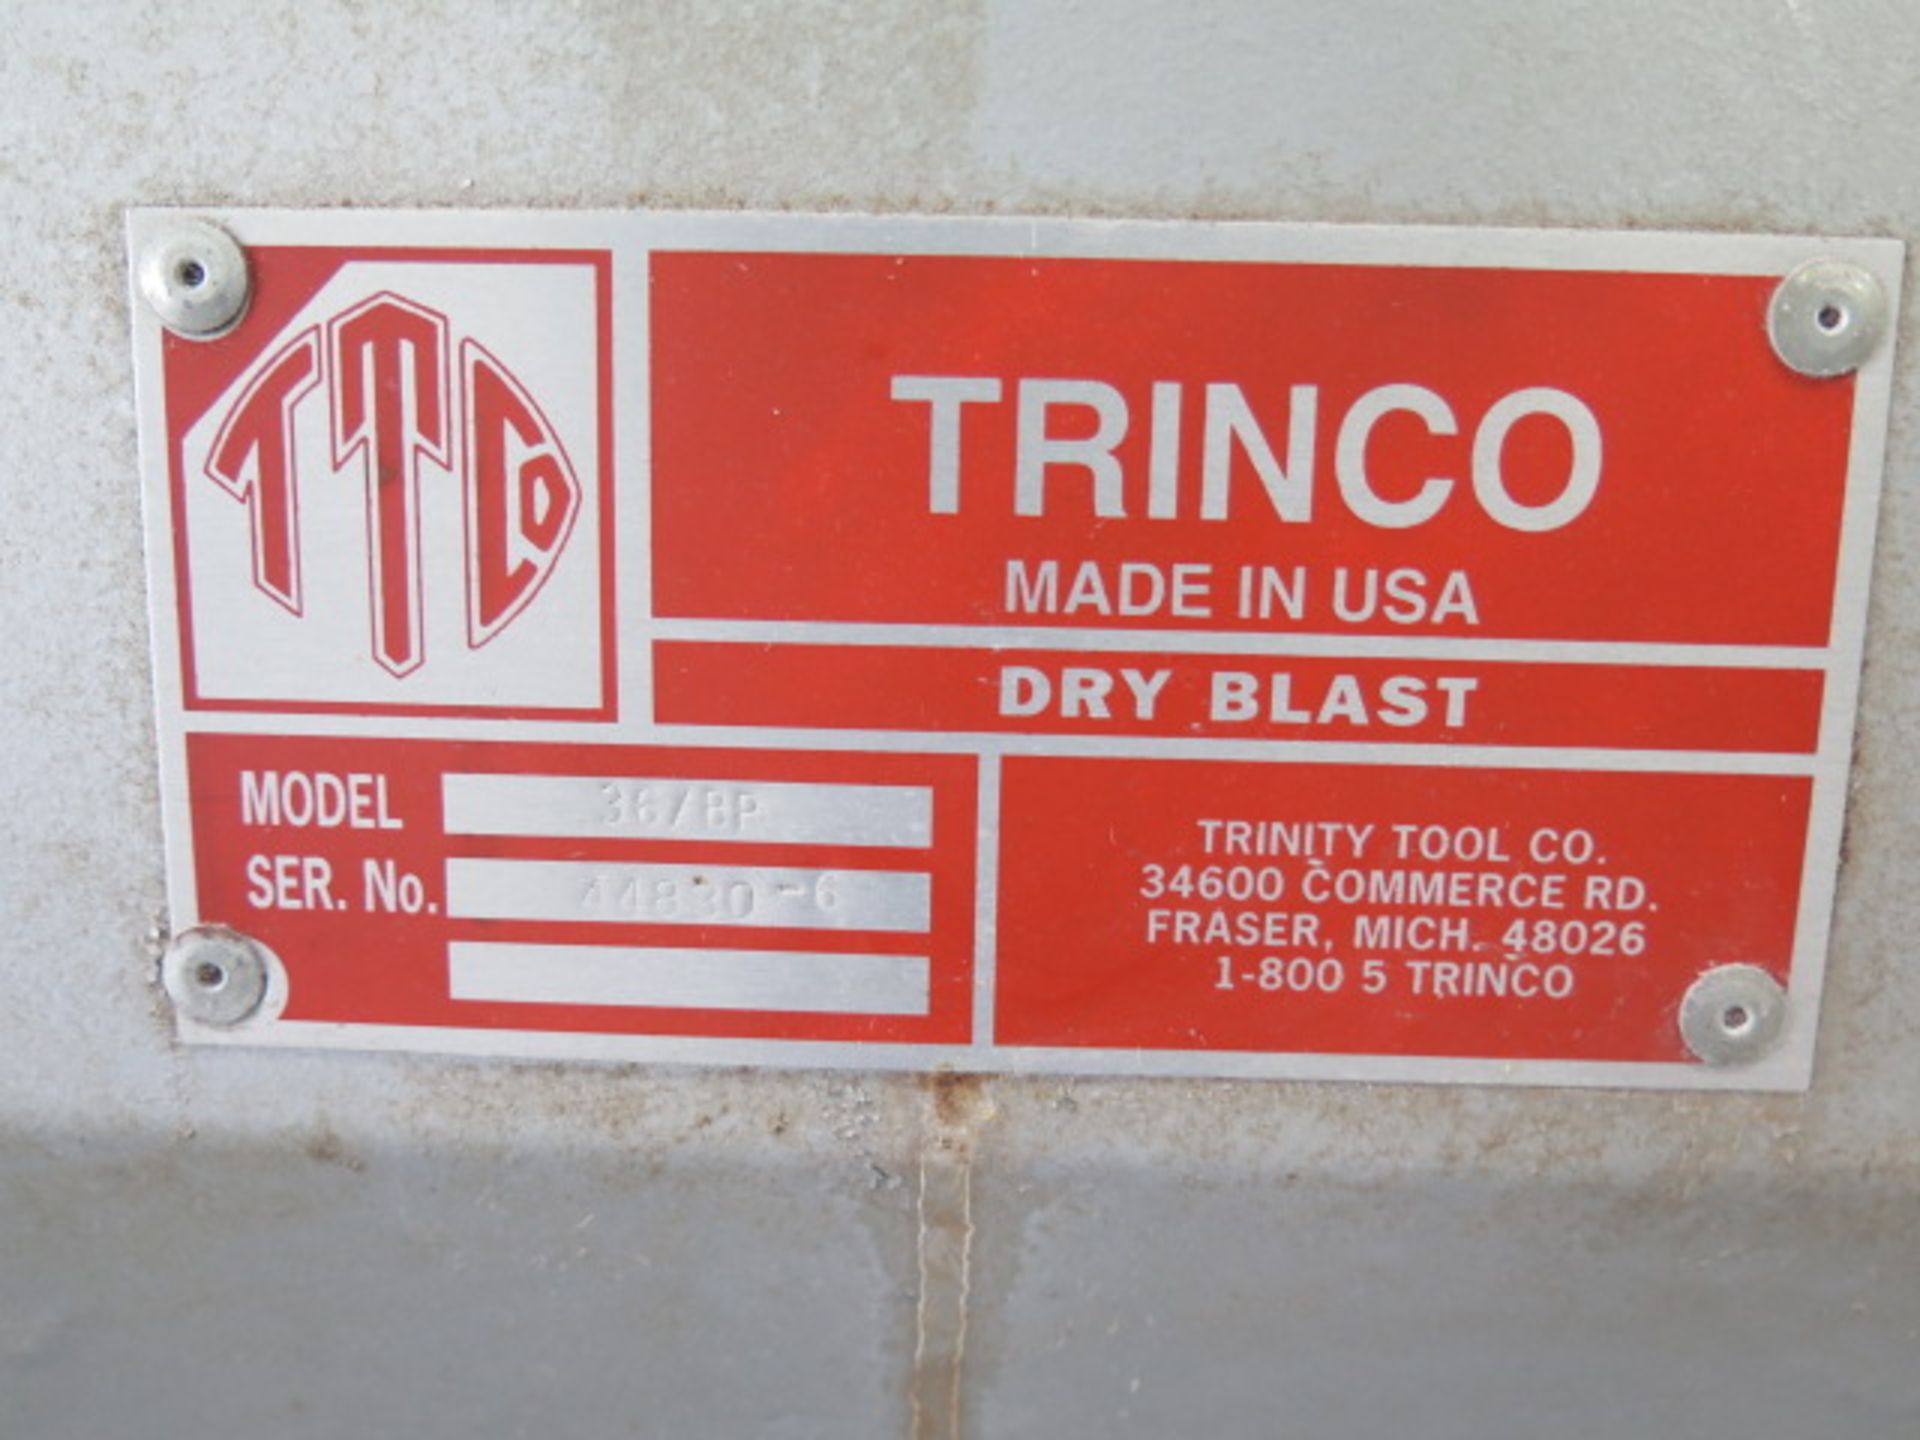 Trinco mdl. 36/BP Dry Blast Cabinet s/n 44830-6 w/ Dust Collector - Image 6 of 6